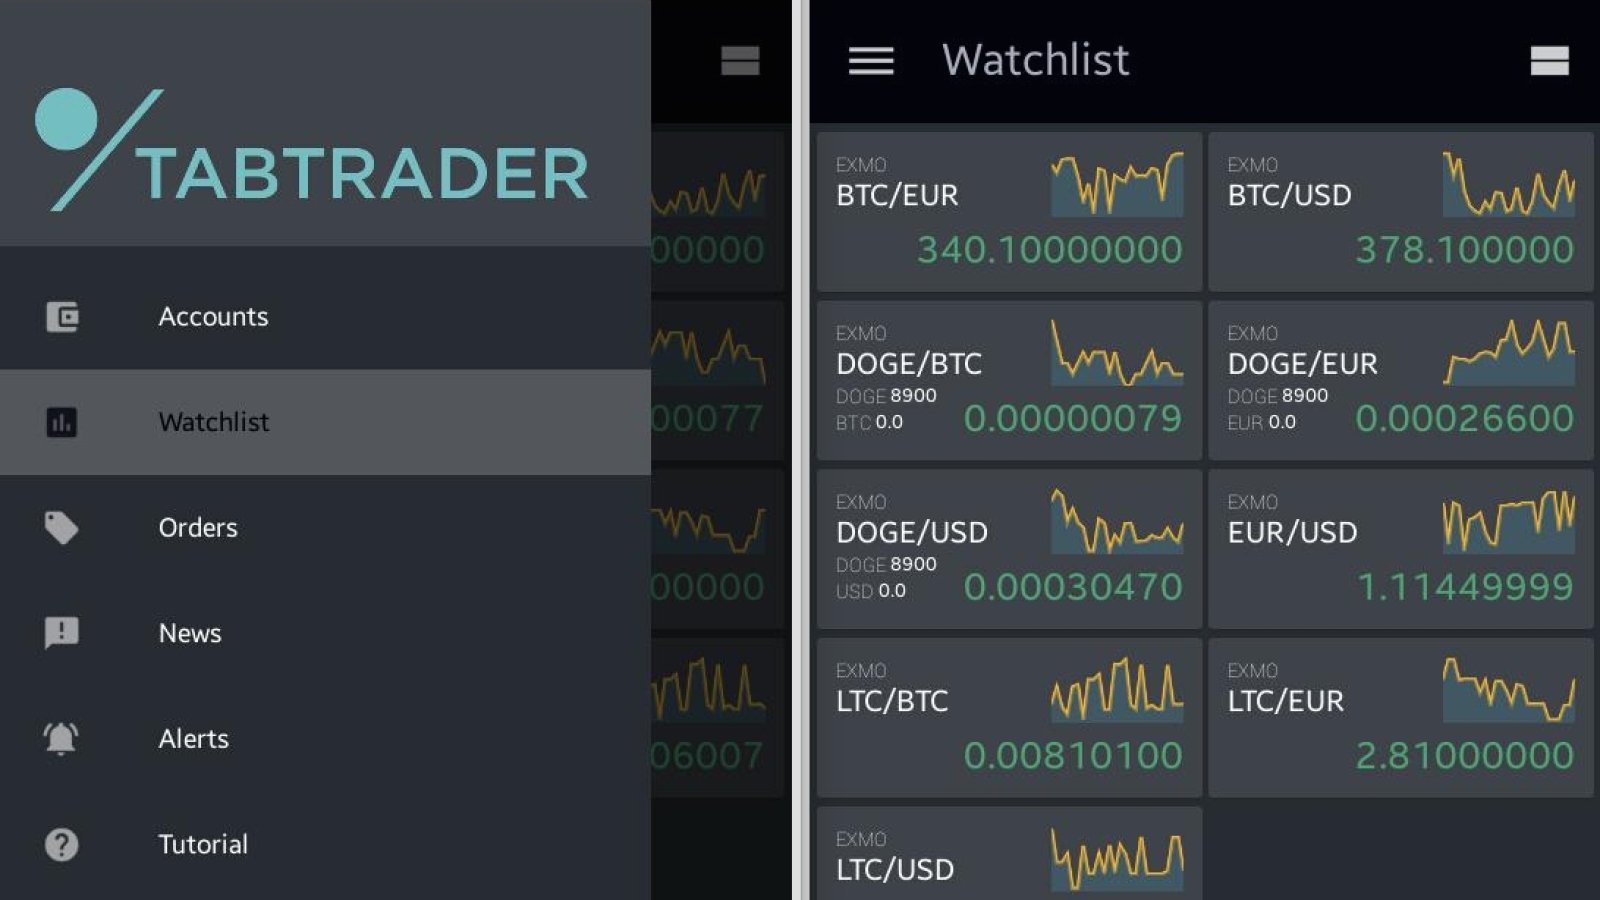 TabTrader mobile app interface